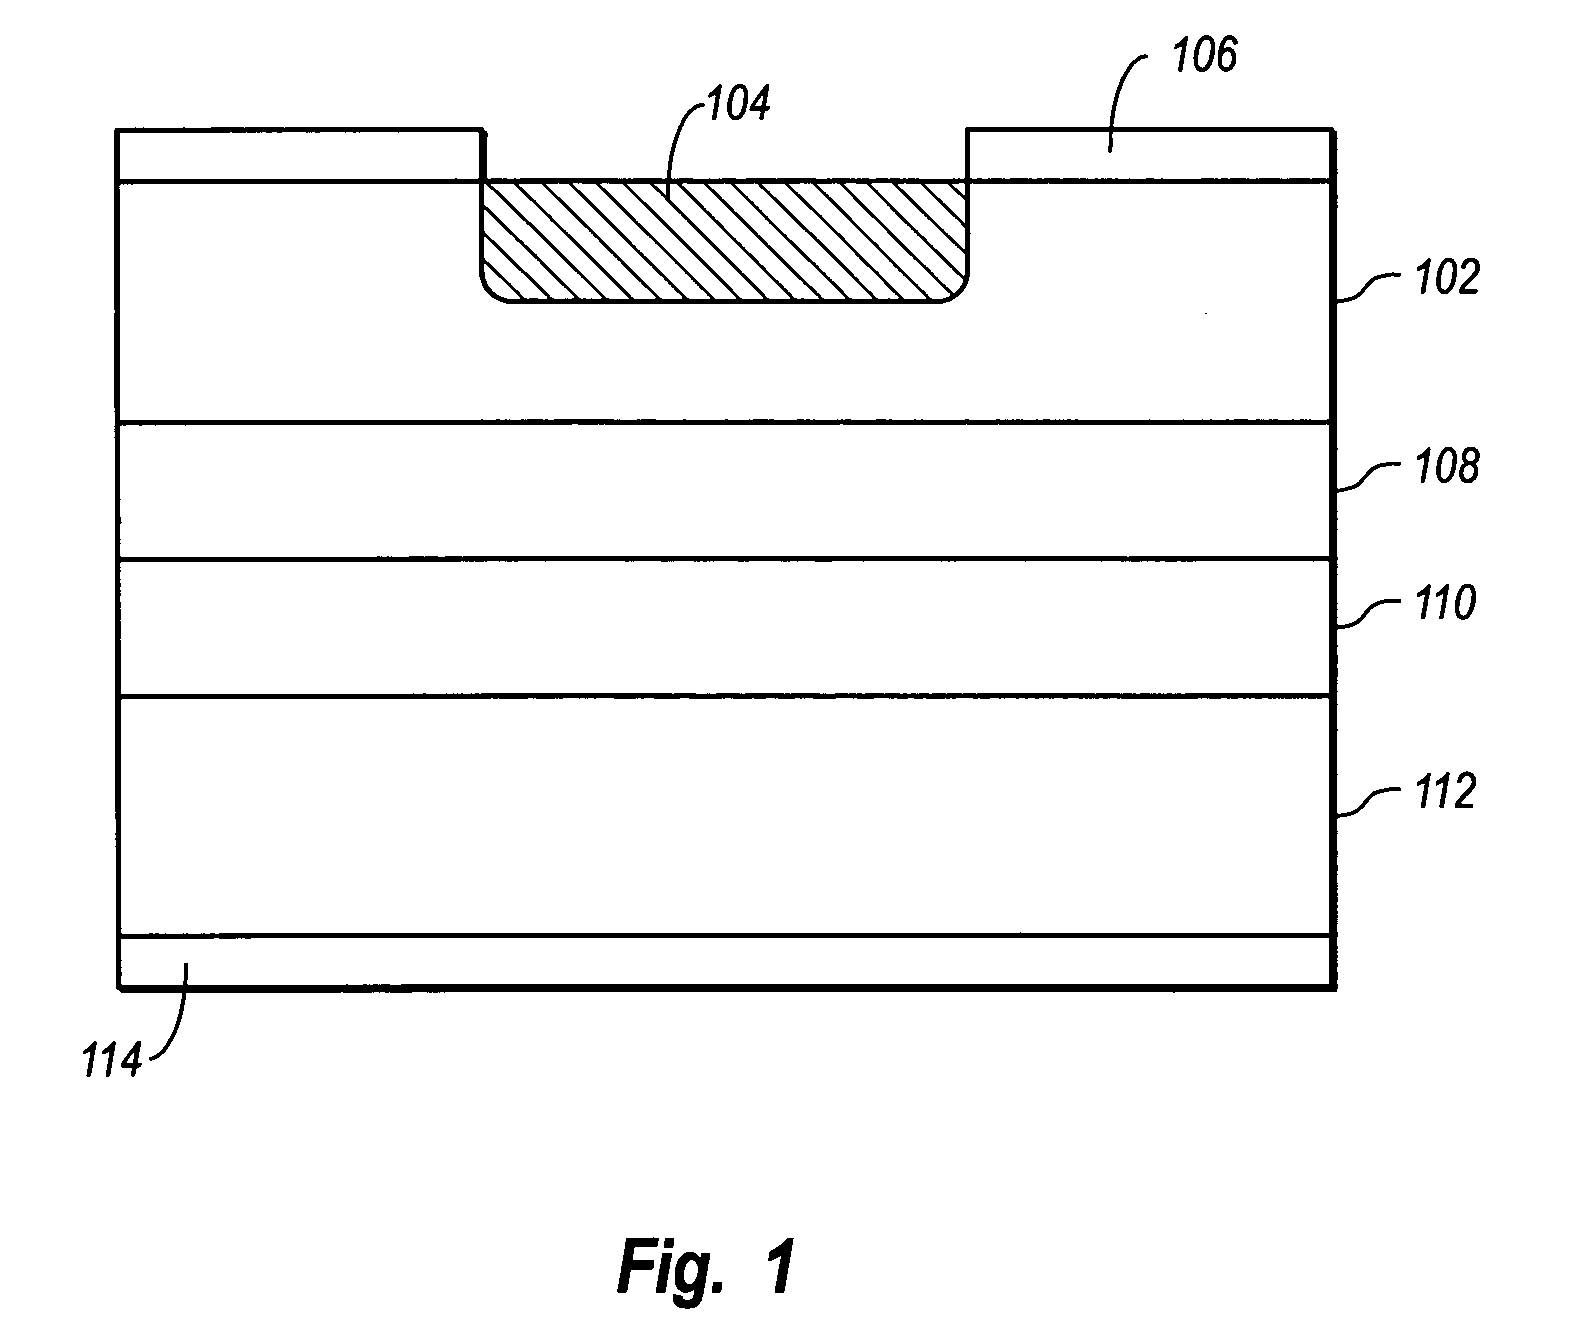 Starved source diffusion for avalanche photodiode